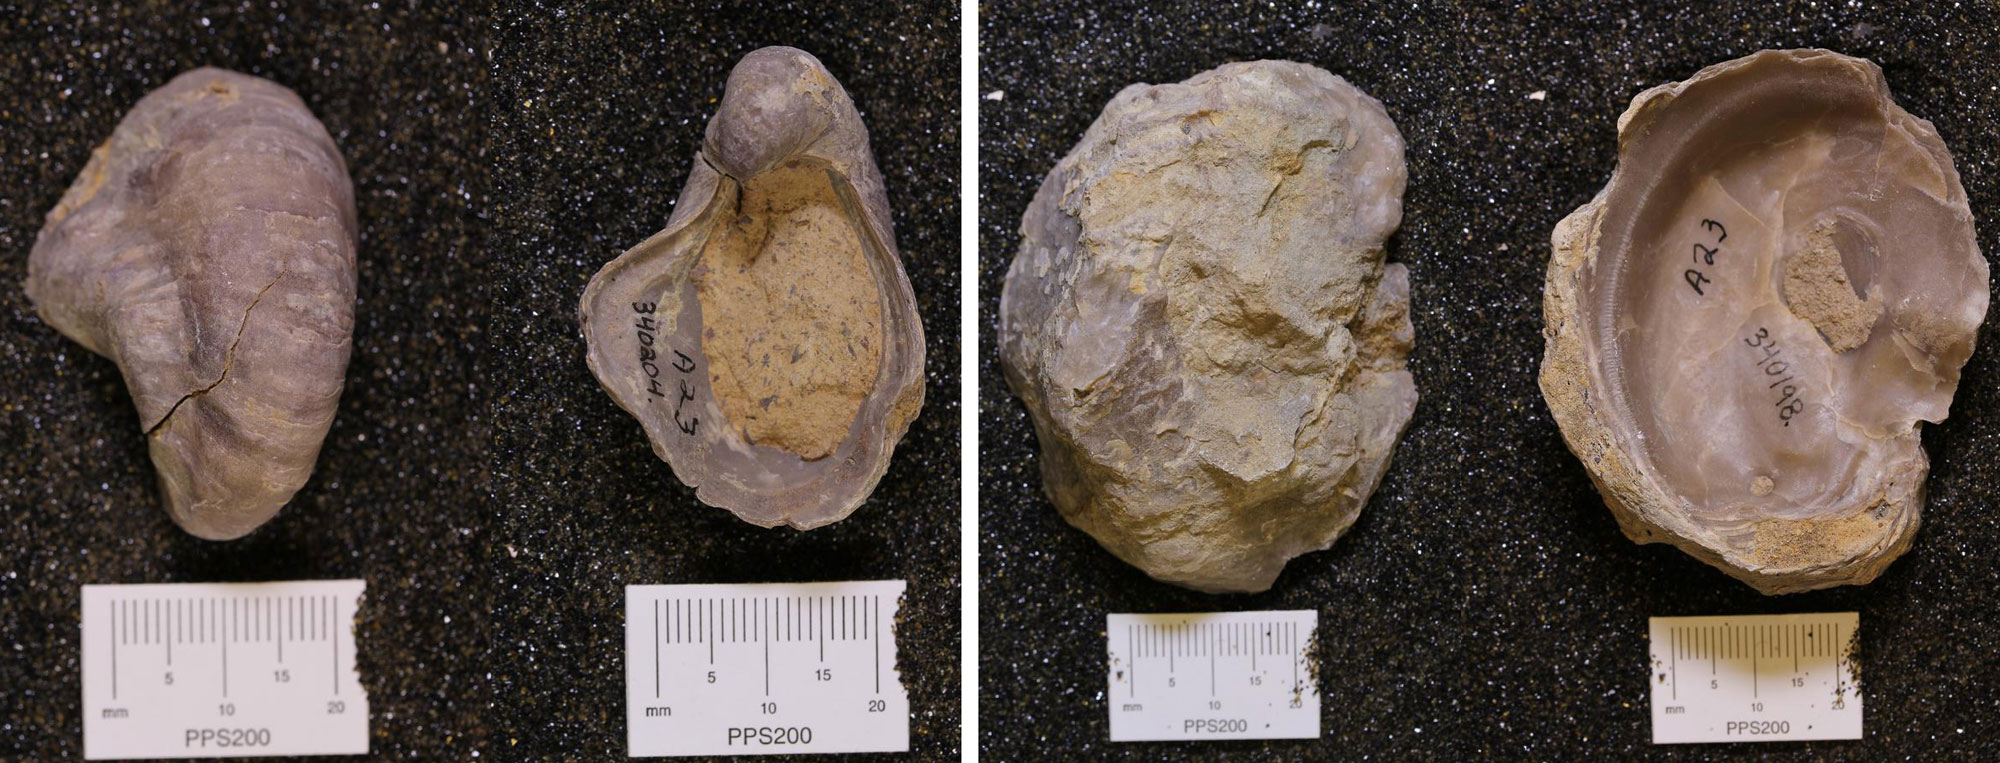 Photos of oysters from the Early Cretaceous of Texas. Panel 1: Two views (top and bottom) of an oyster called the devil's toenail. Panel 2: Inner and outer shell surface of an oyster.